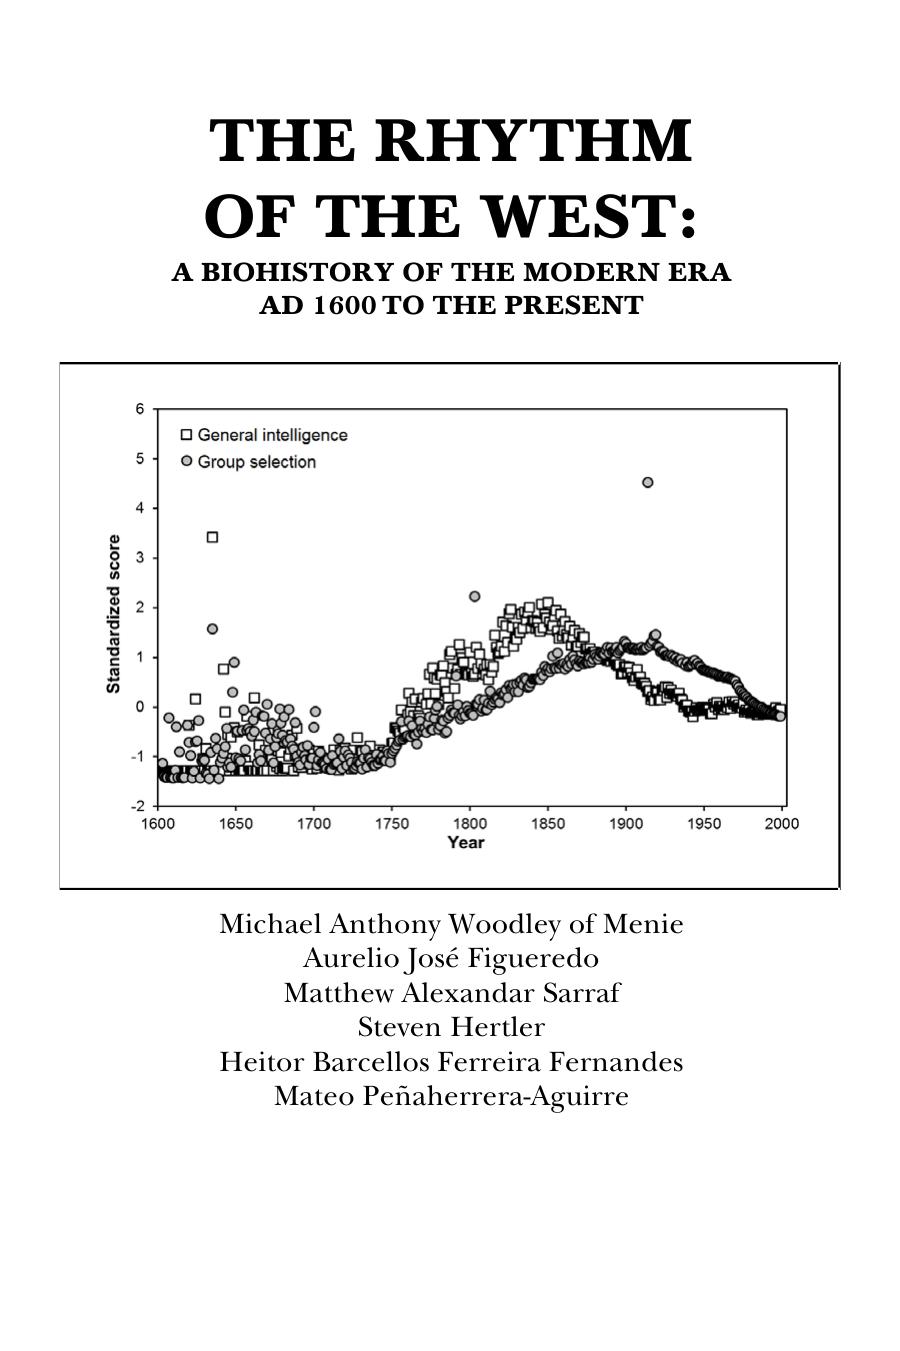 The Rhythm of the West: Journal of Social, Political and Economic Studies Monograph Series Number 37: A Biohistory of the Modern Era, AD 1600 to Present